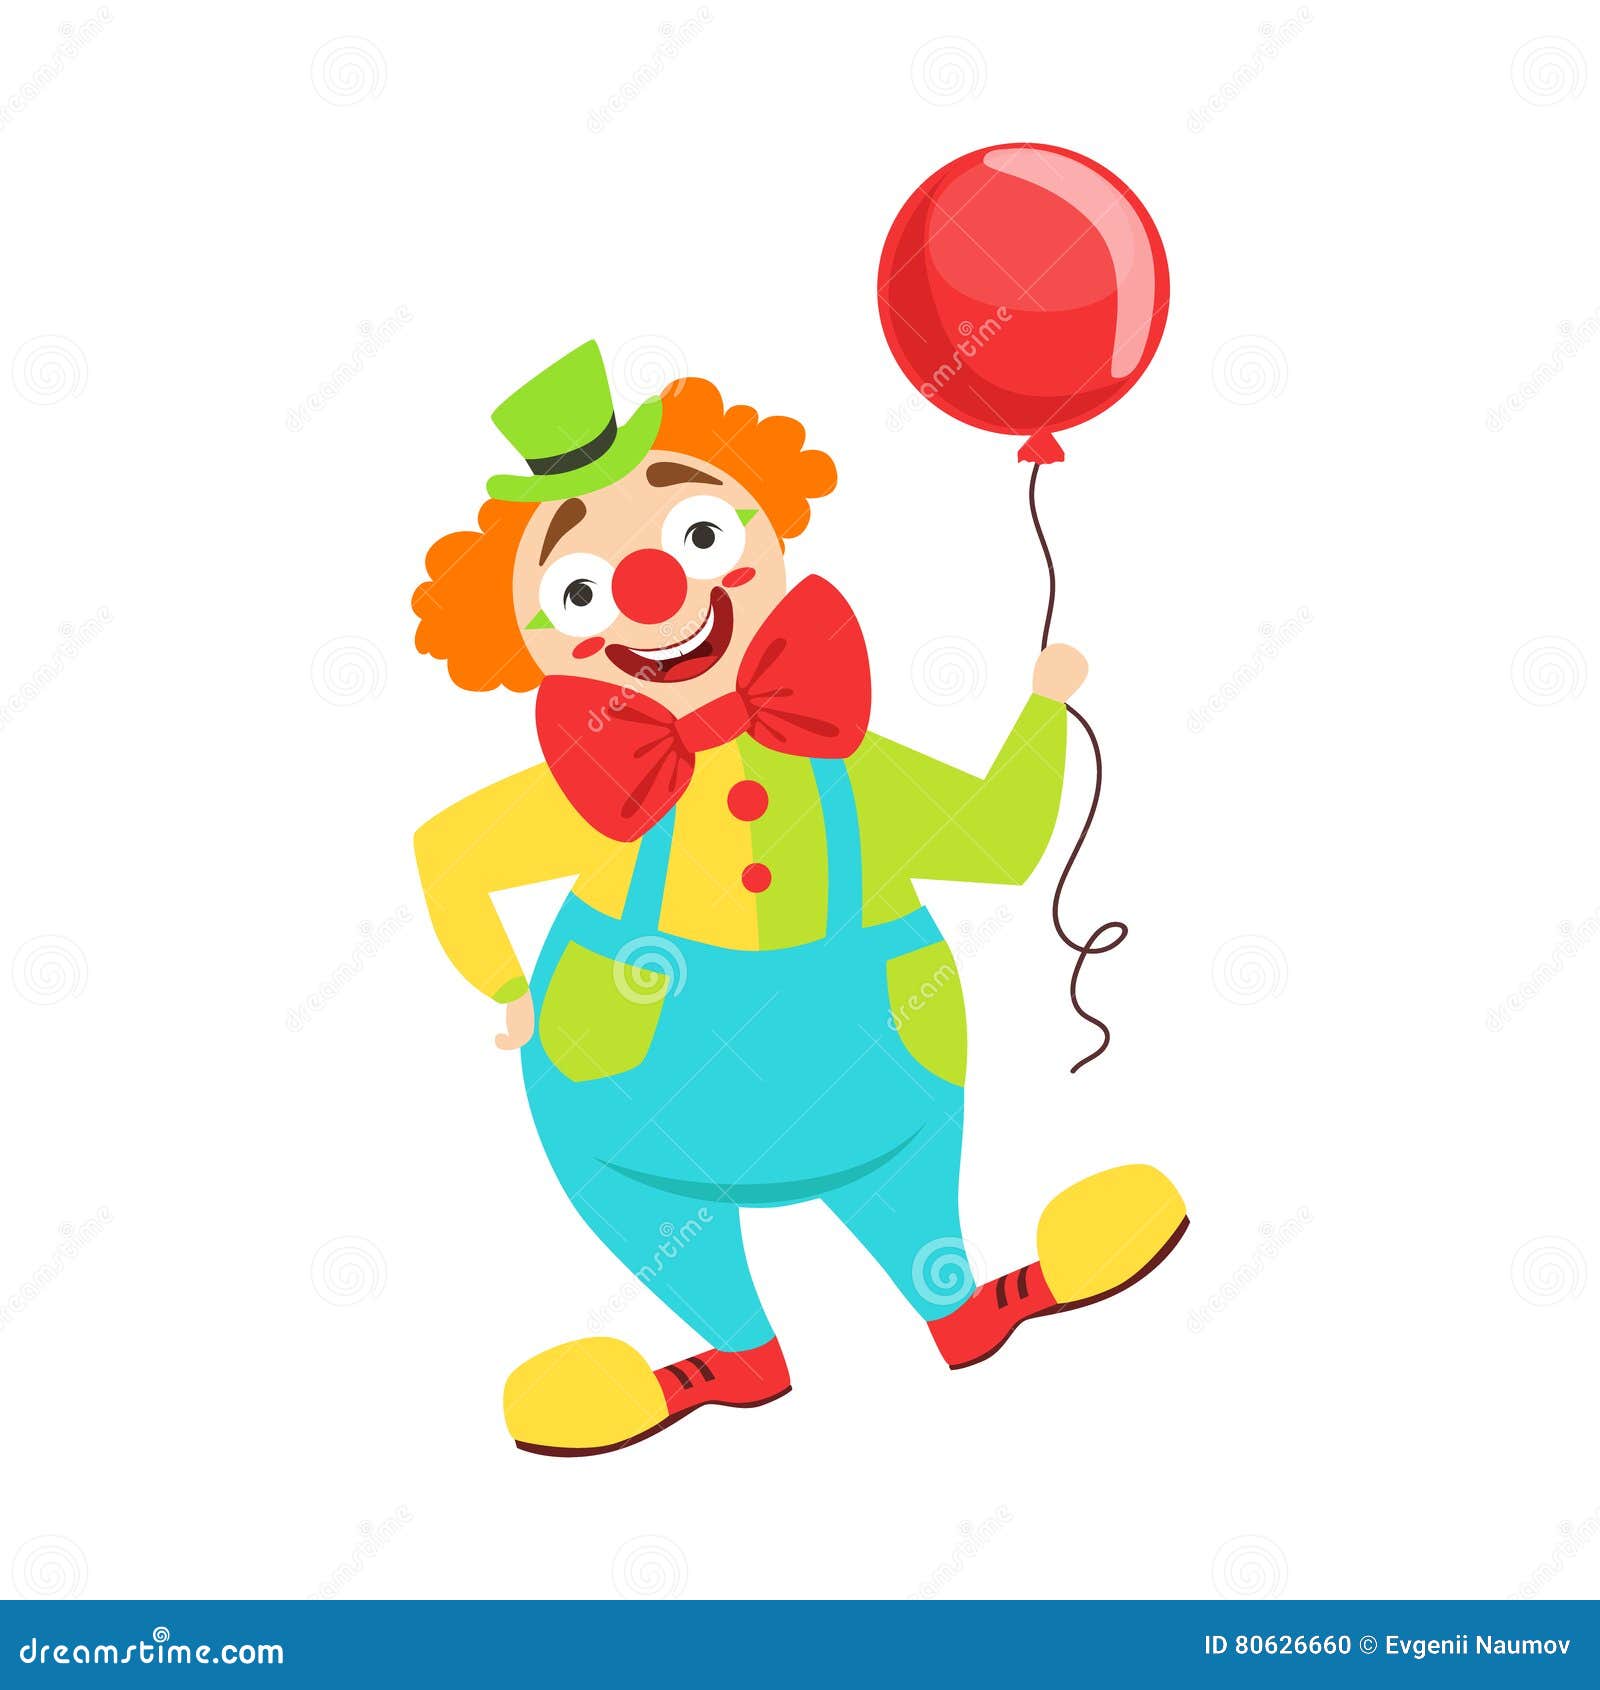 Circus Clown Artist in Classic Outfit with Red Nose and Make Up Holding a  Balloon in the Circus Show Stock Vector - Illustration of background,  isolated: 80626660